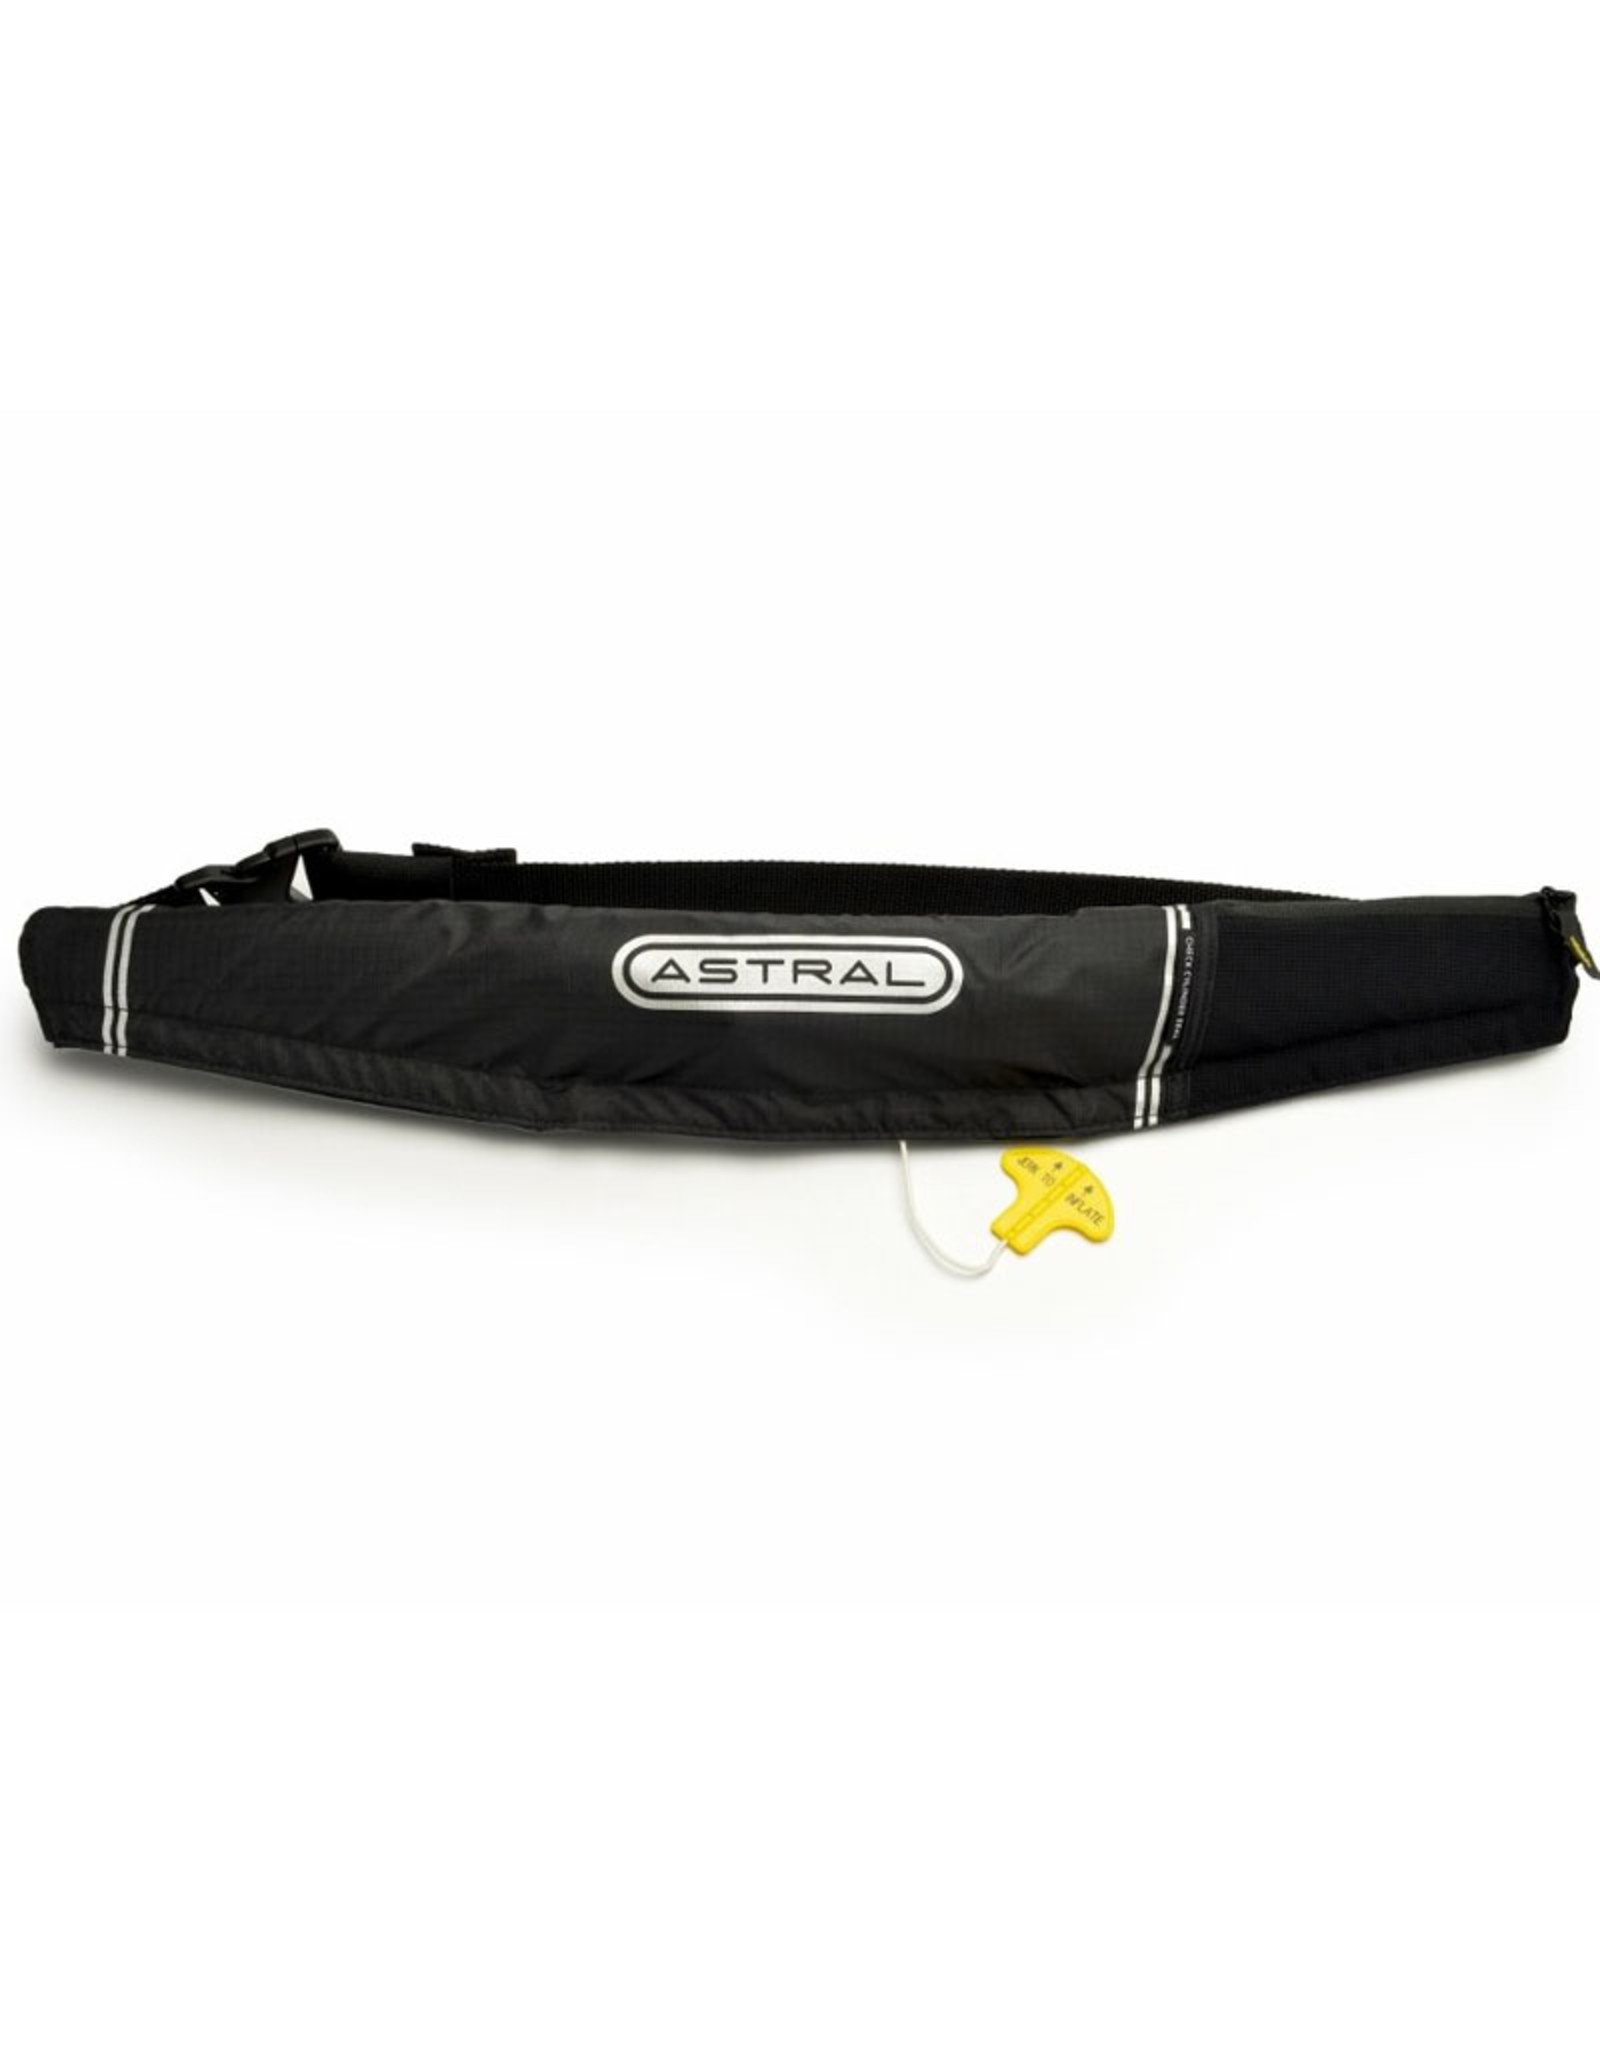 Astral Astral Airbelt Inflatable PFD- Discontinued style